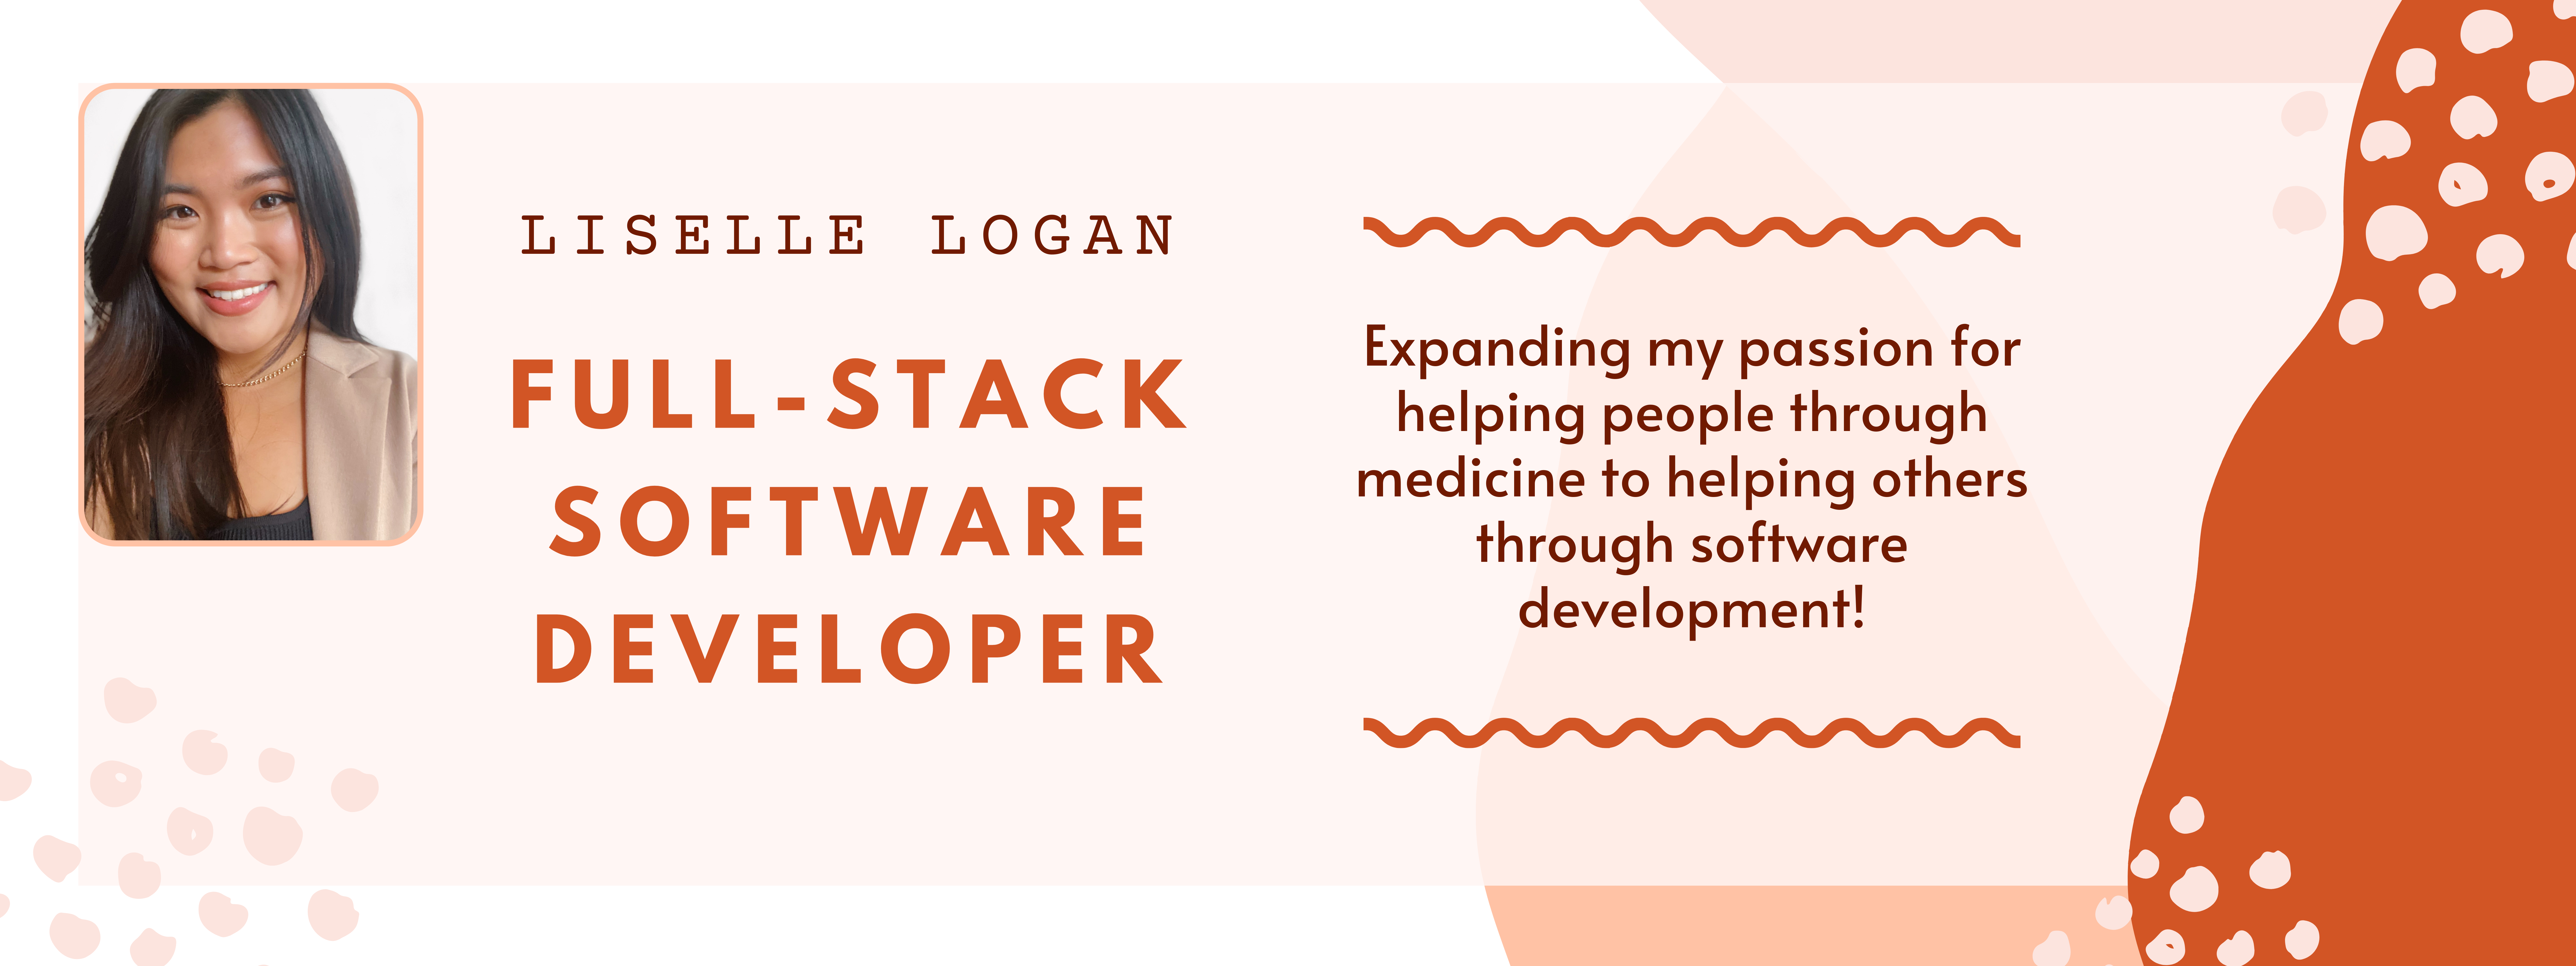 Banner that says Liselle Logan Full-Stack Software Developer - Expanding my passion for helping people through medicine to helping others through software development!